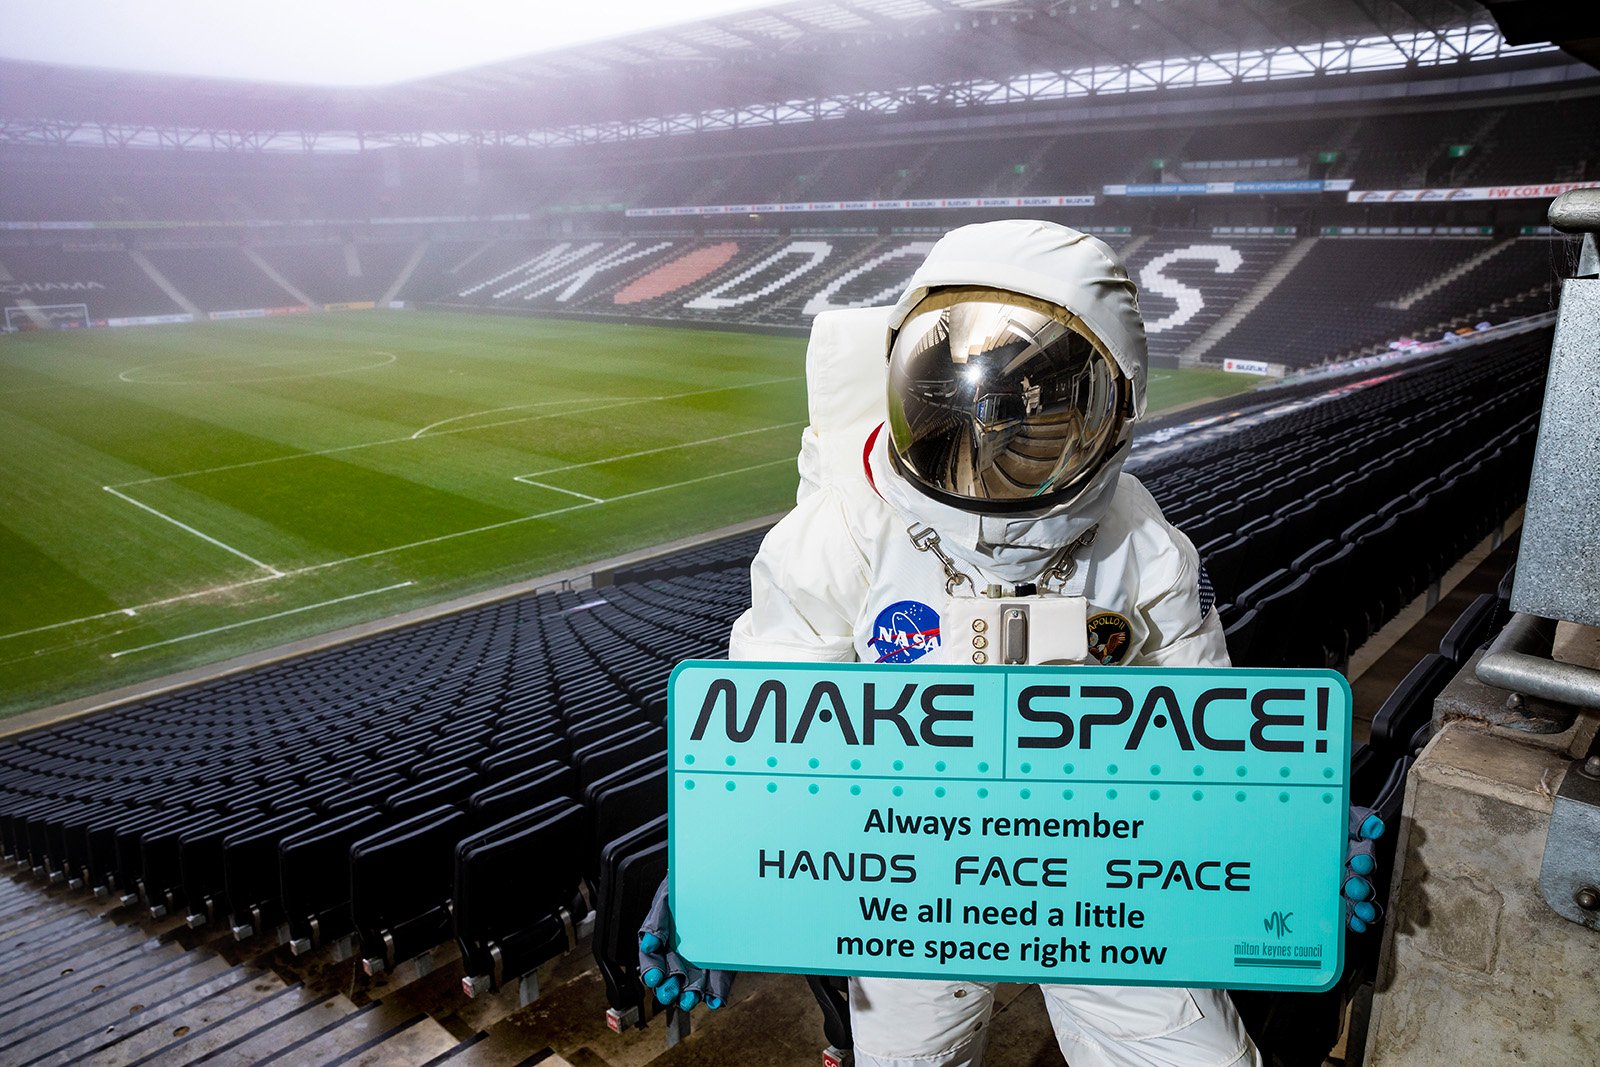 Astronaut reminds everyone to MAKE SPACE in Milton Keynes